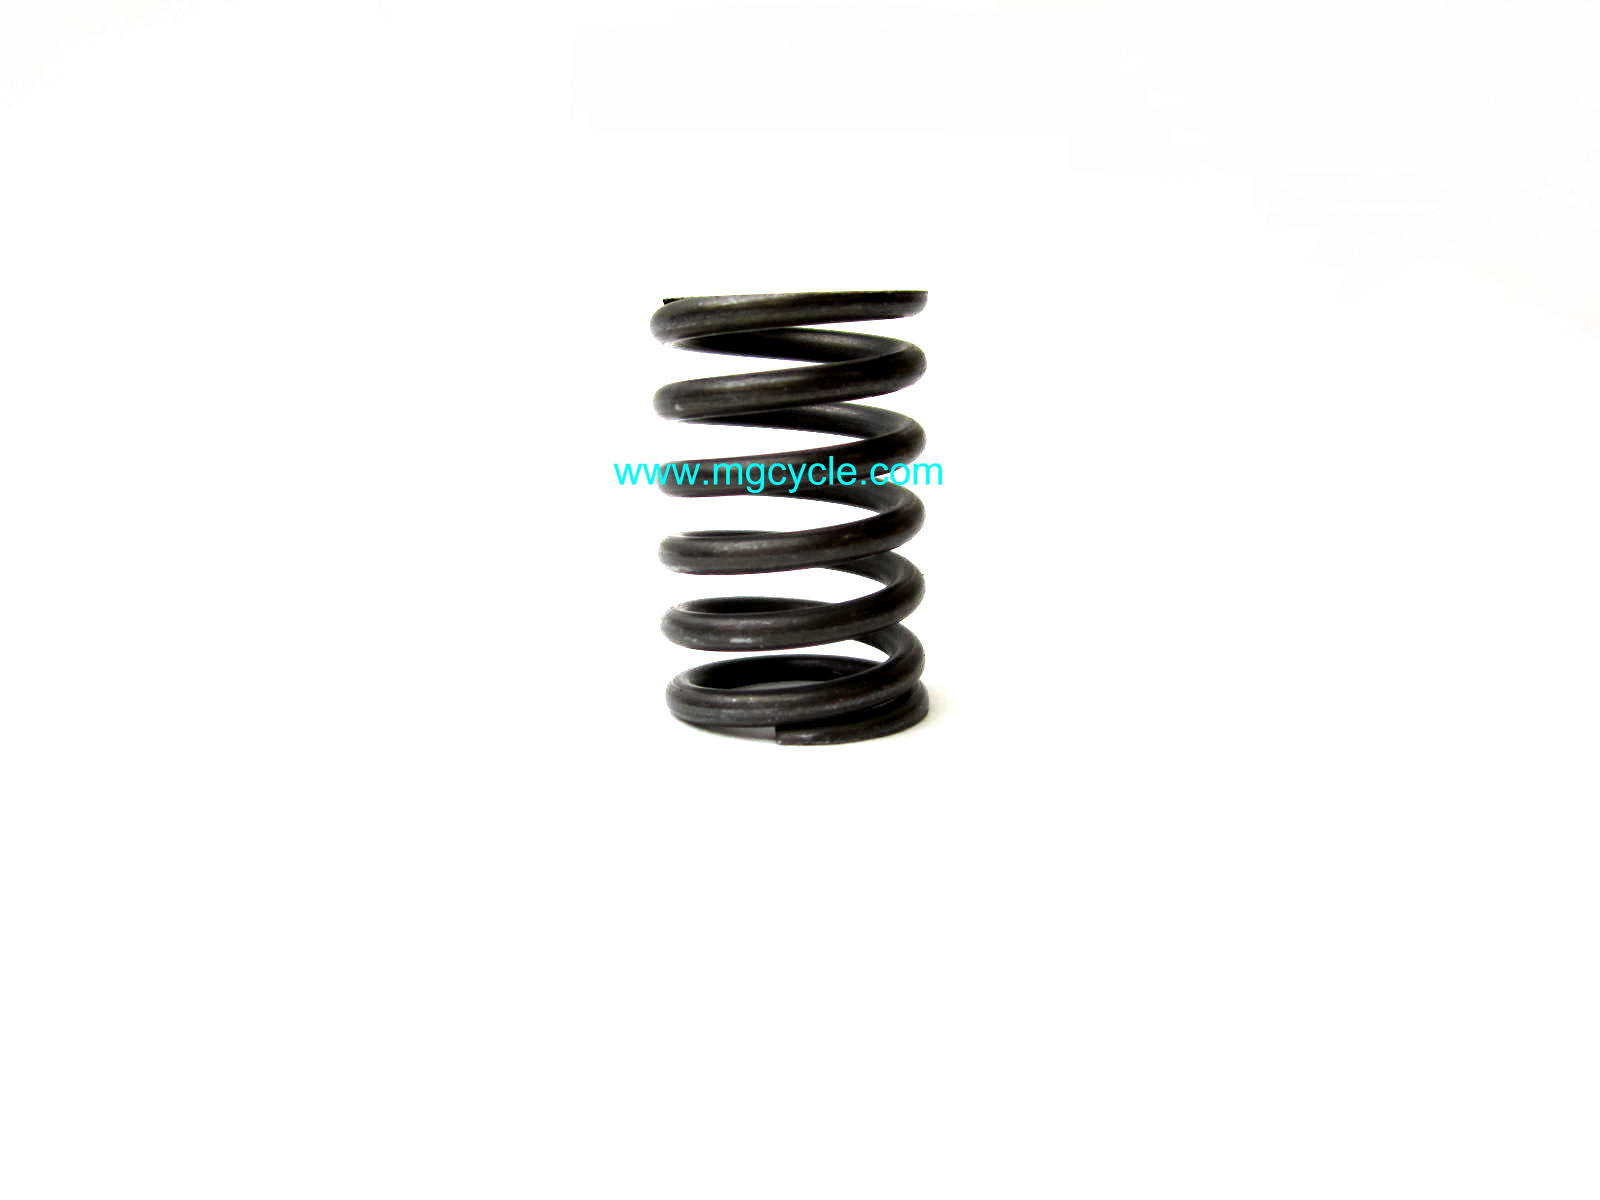 Soft clutch spring for late model 10 spring clutches GU04084100 - Click Image to Close